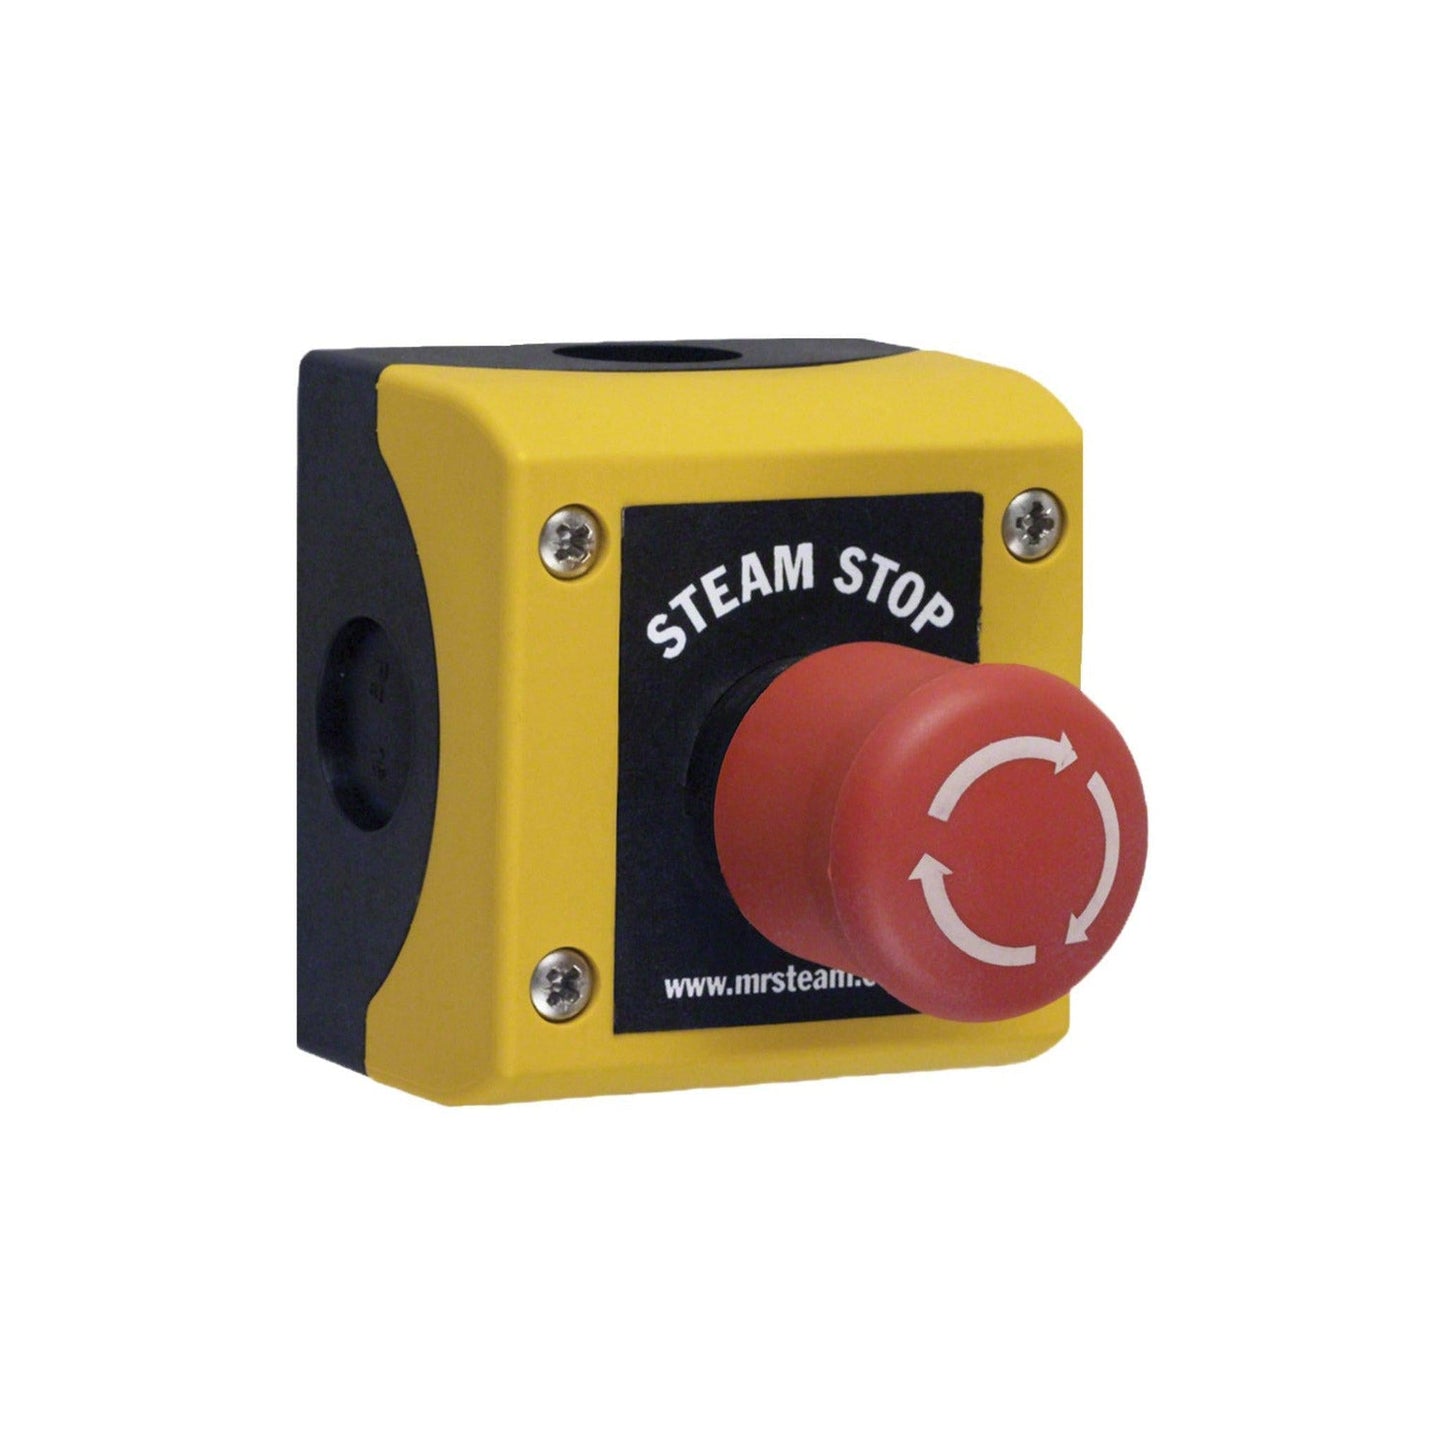 MrSteam Commercial 4" x 3" x 3" CU Steam Stop Emergency Stop Switch